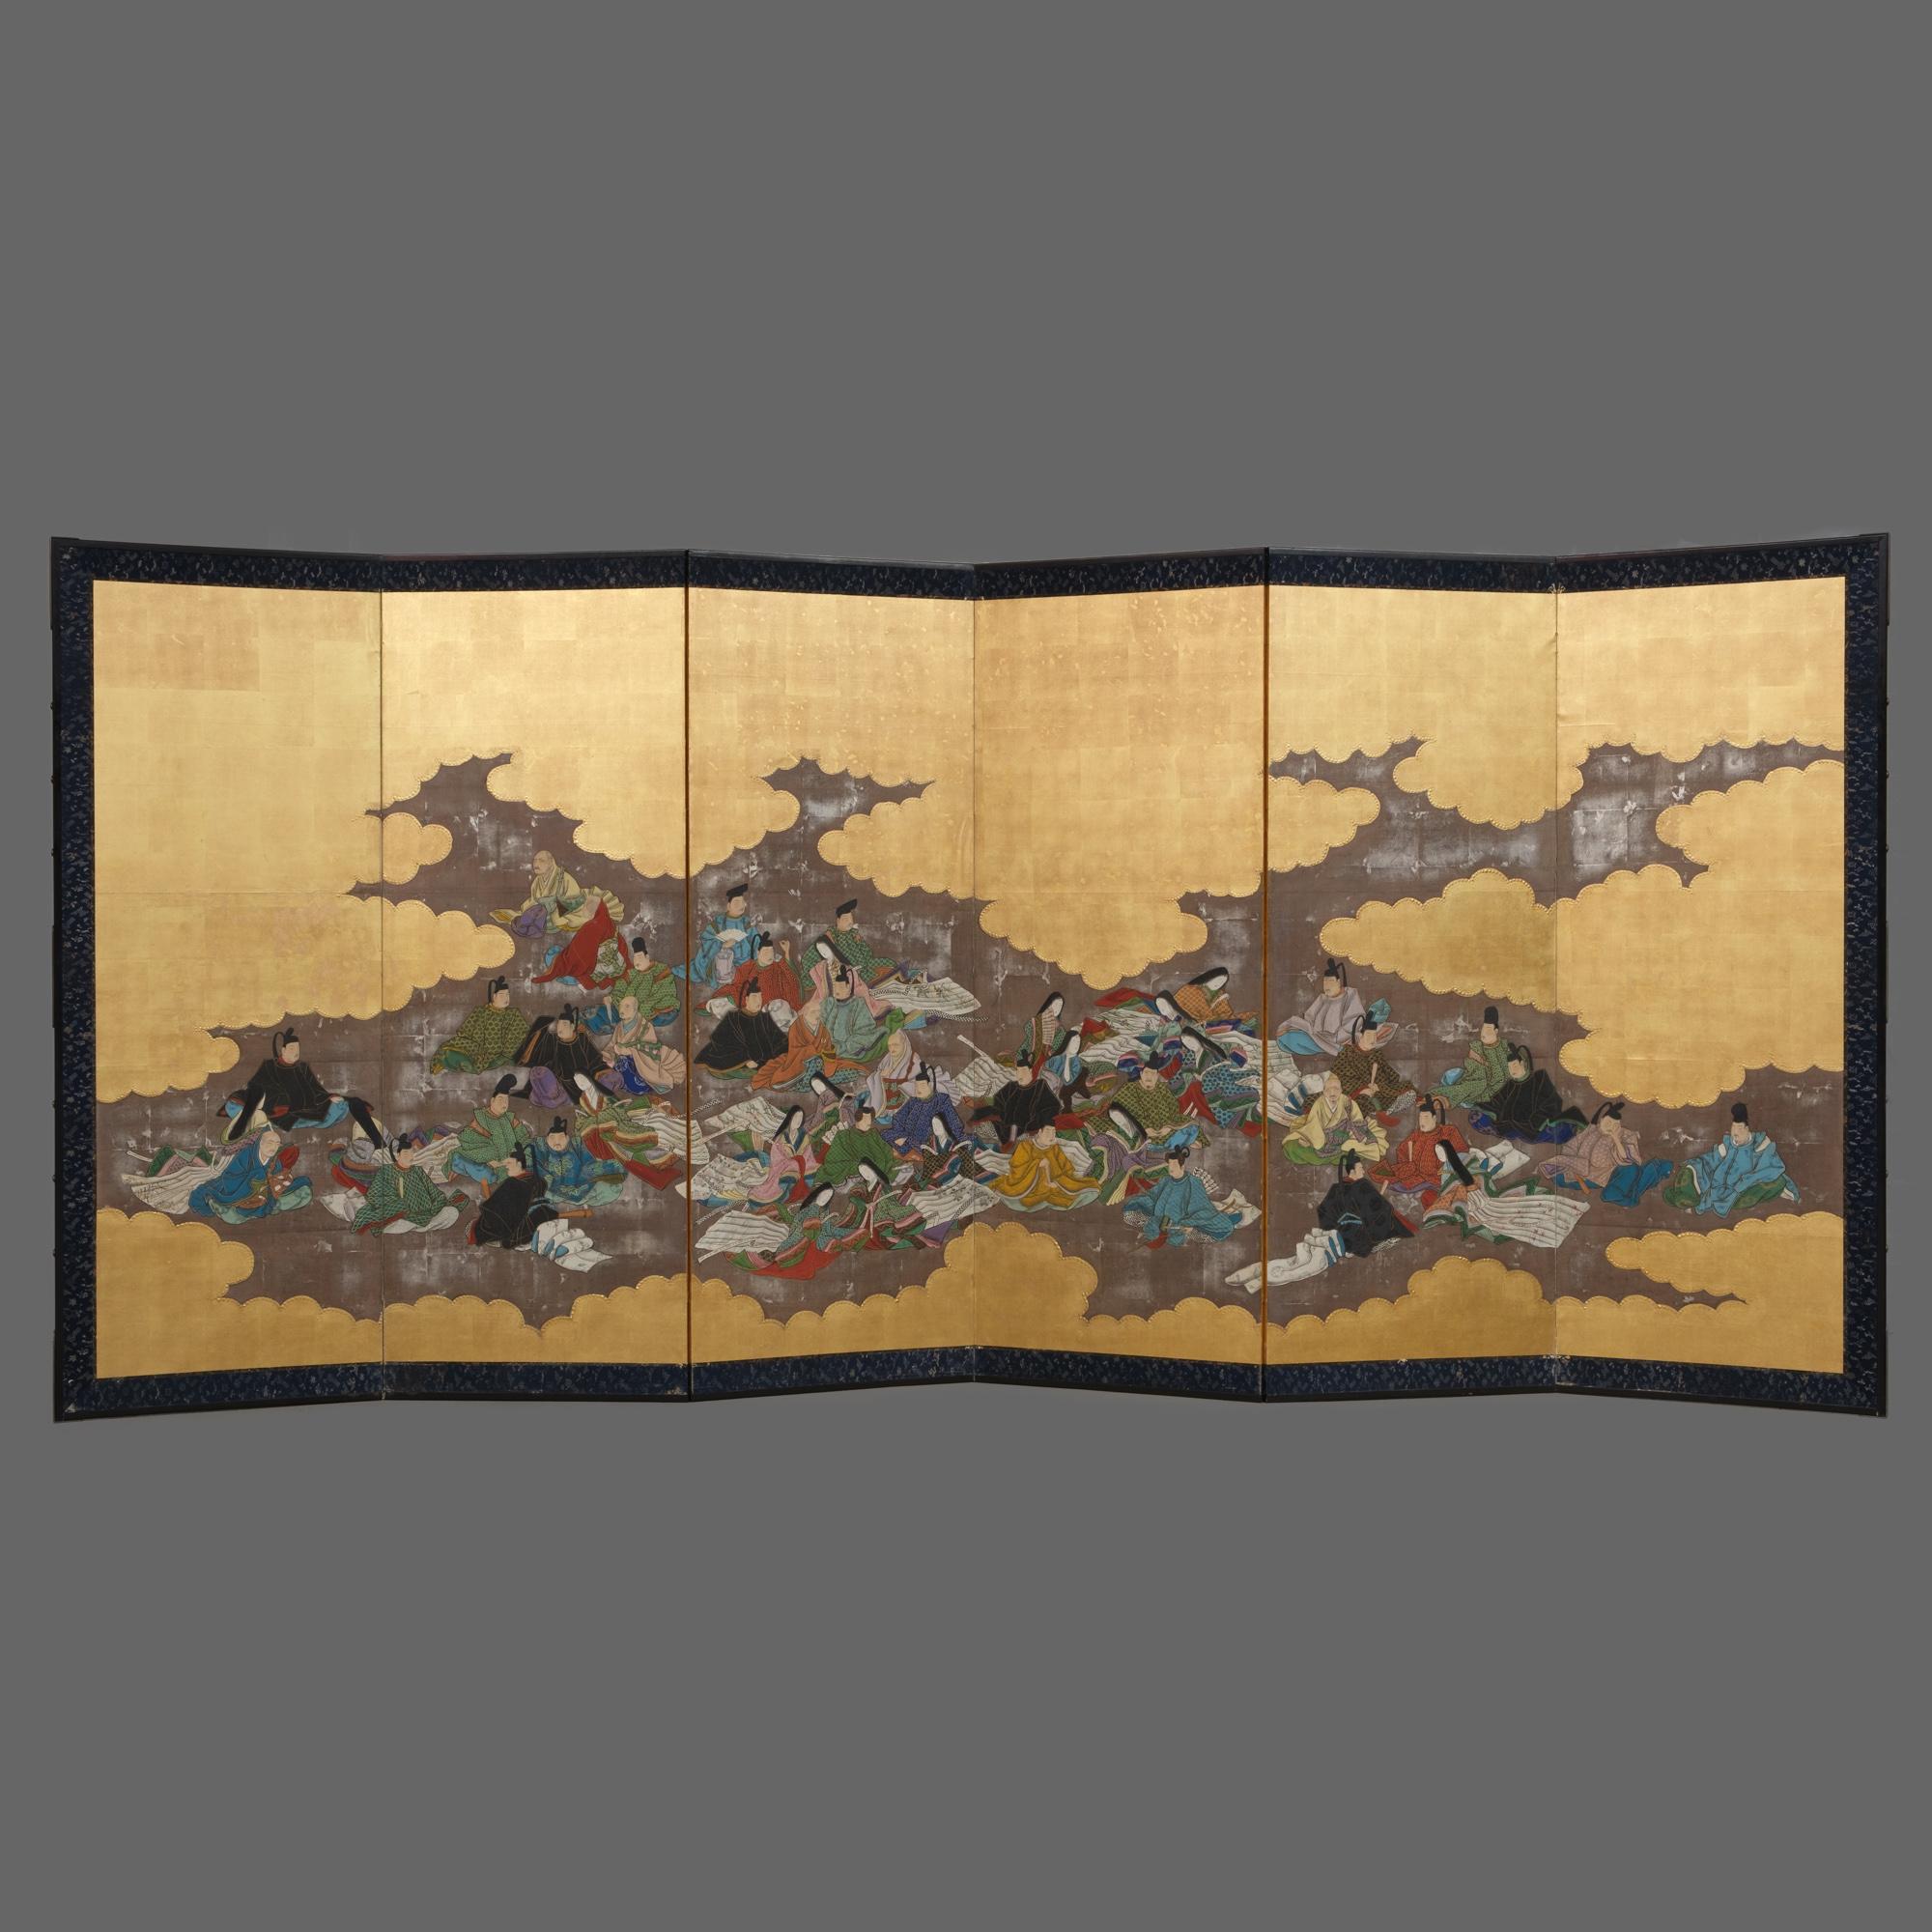 A magnificent pair of large six-panel byôbu (folding screens) with a detailed painting on gold- and silver leaf of a large group of noblemen, officials, monks and warriors accompanied by many beautiful women in traditional Heian attire.
It is themed